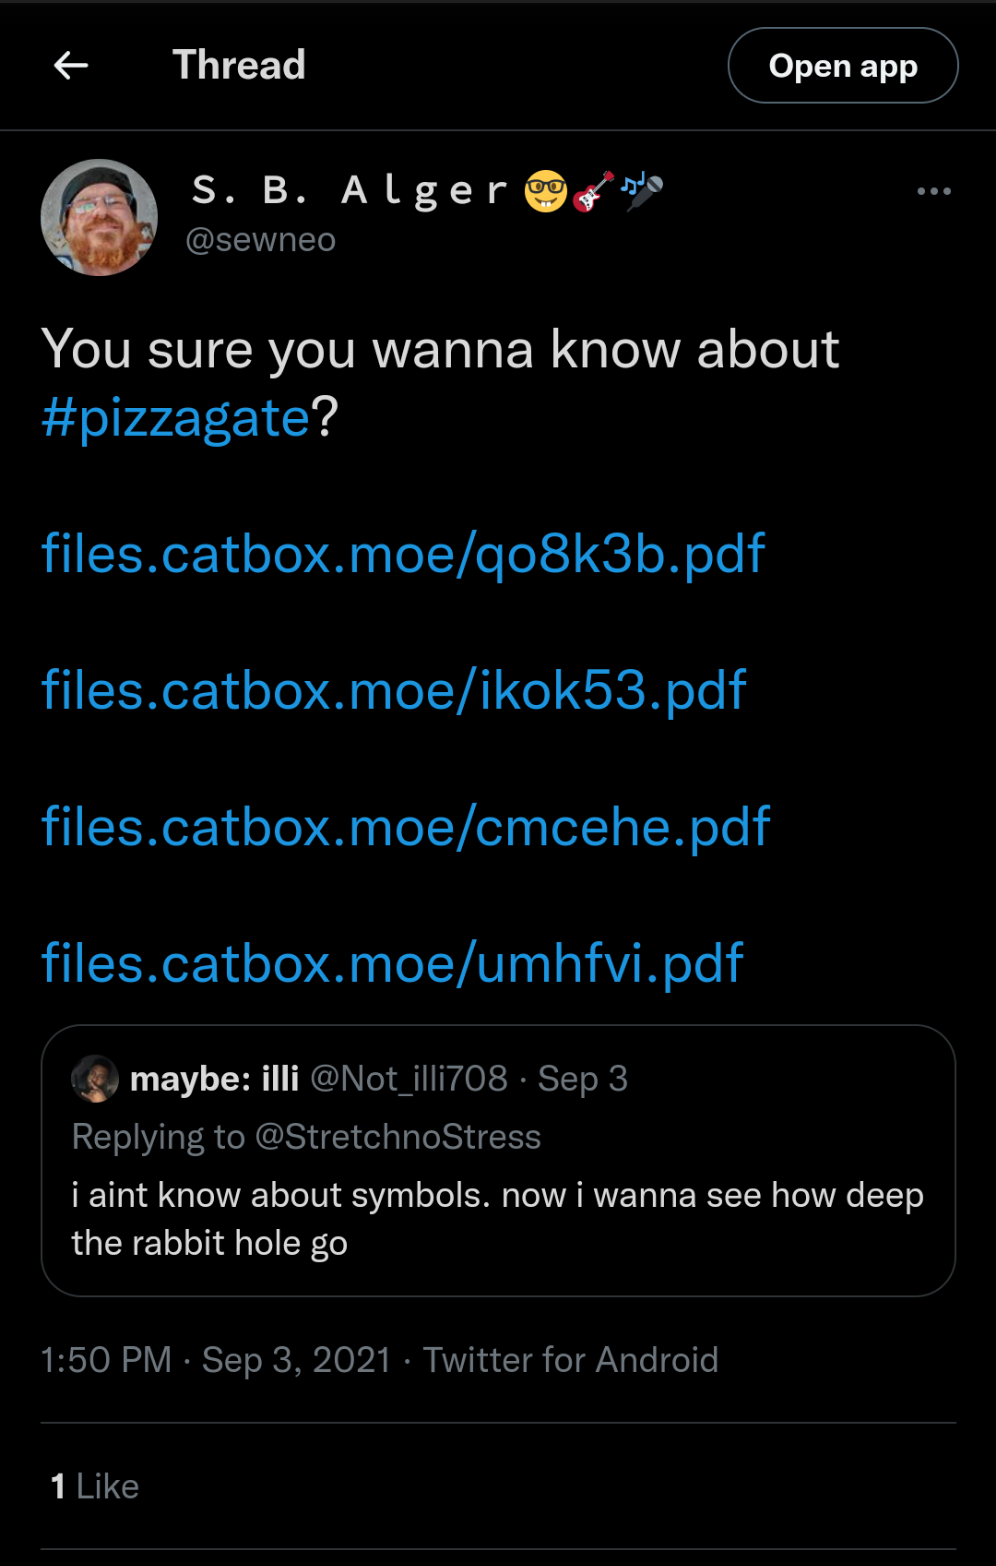 Twitter, S.B. Alger @sewneo:  You are sure you wanna know about #pizzagate? ...  Quoting maybe:illi @Not_illi708 [bot]:  Relying to @StretchnoStress:  "i aint know about symbols. now i wanna see how deep the rabbit hole go"